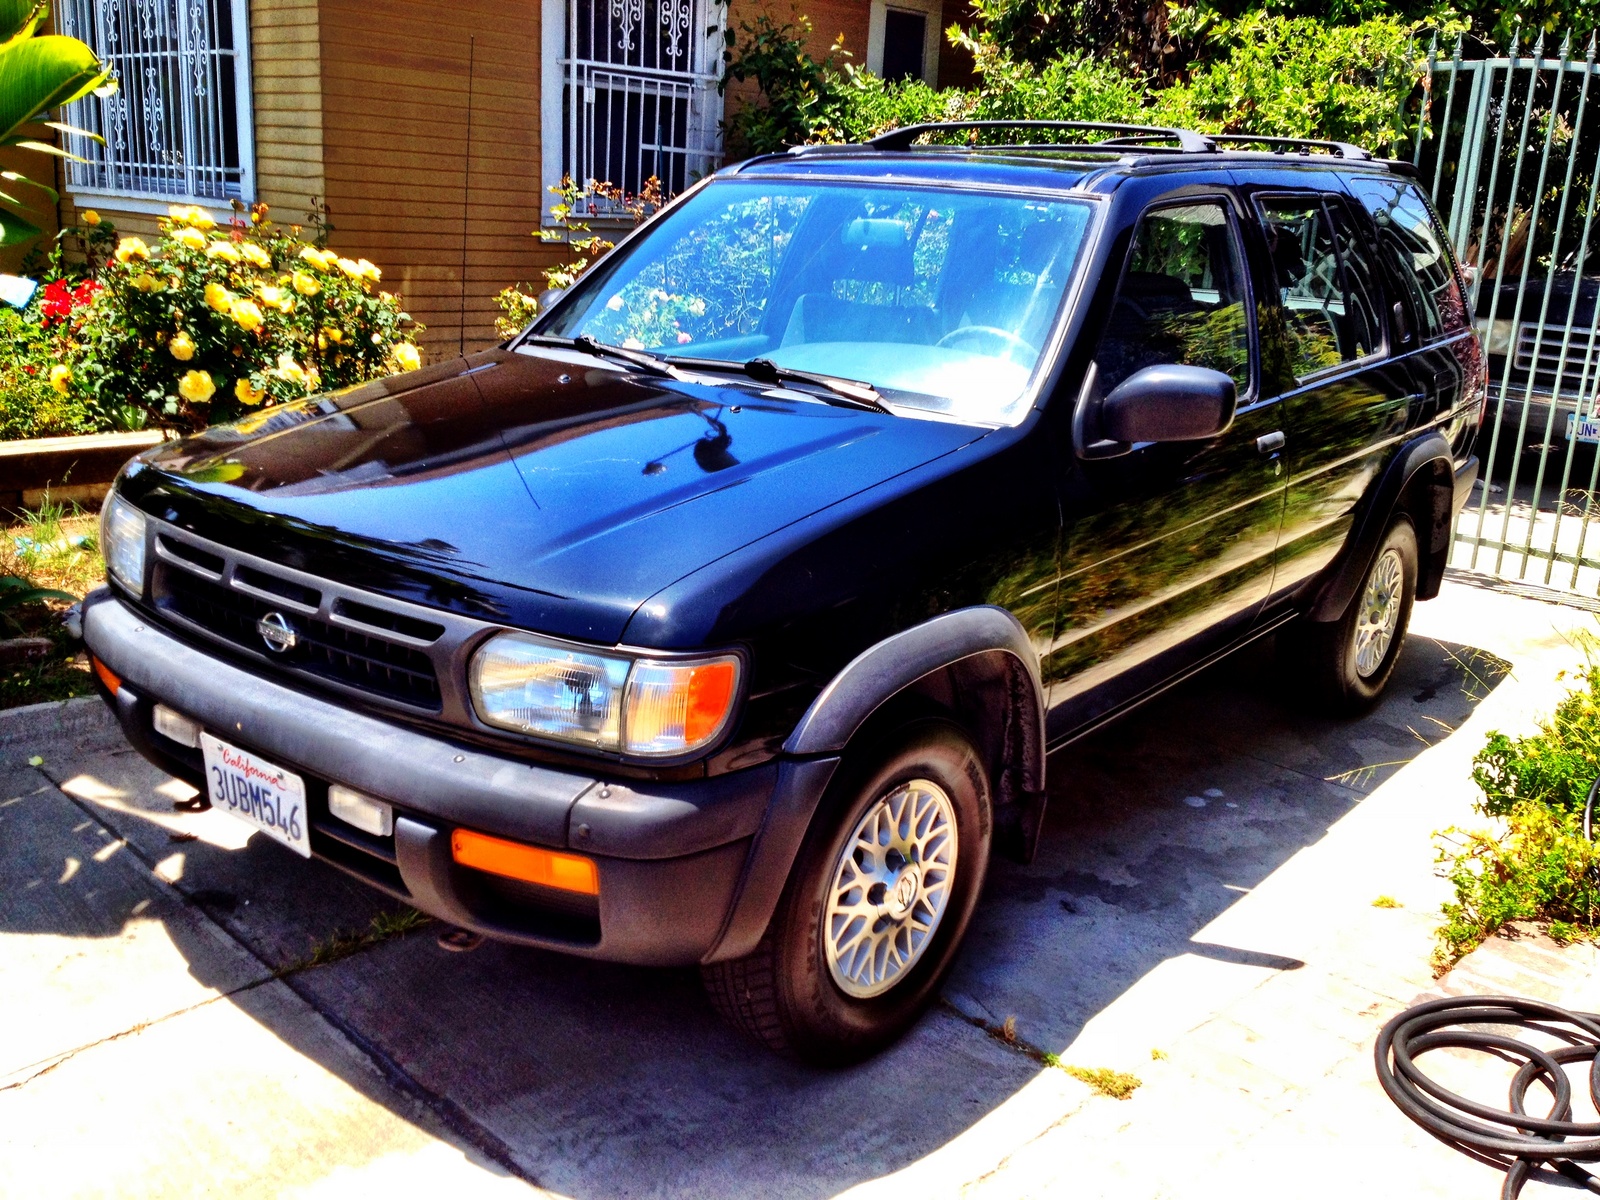 Used 1997 nissan pathfinder review #5